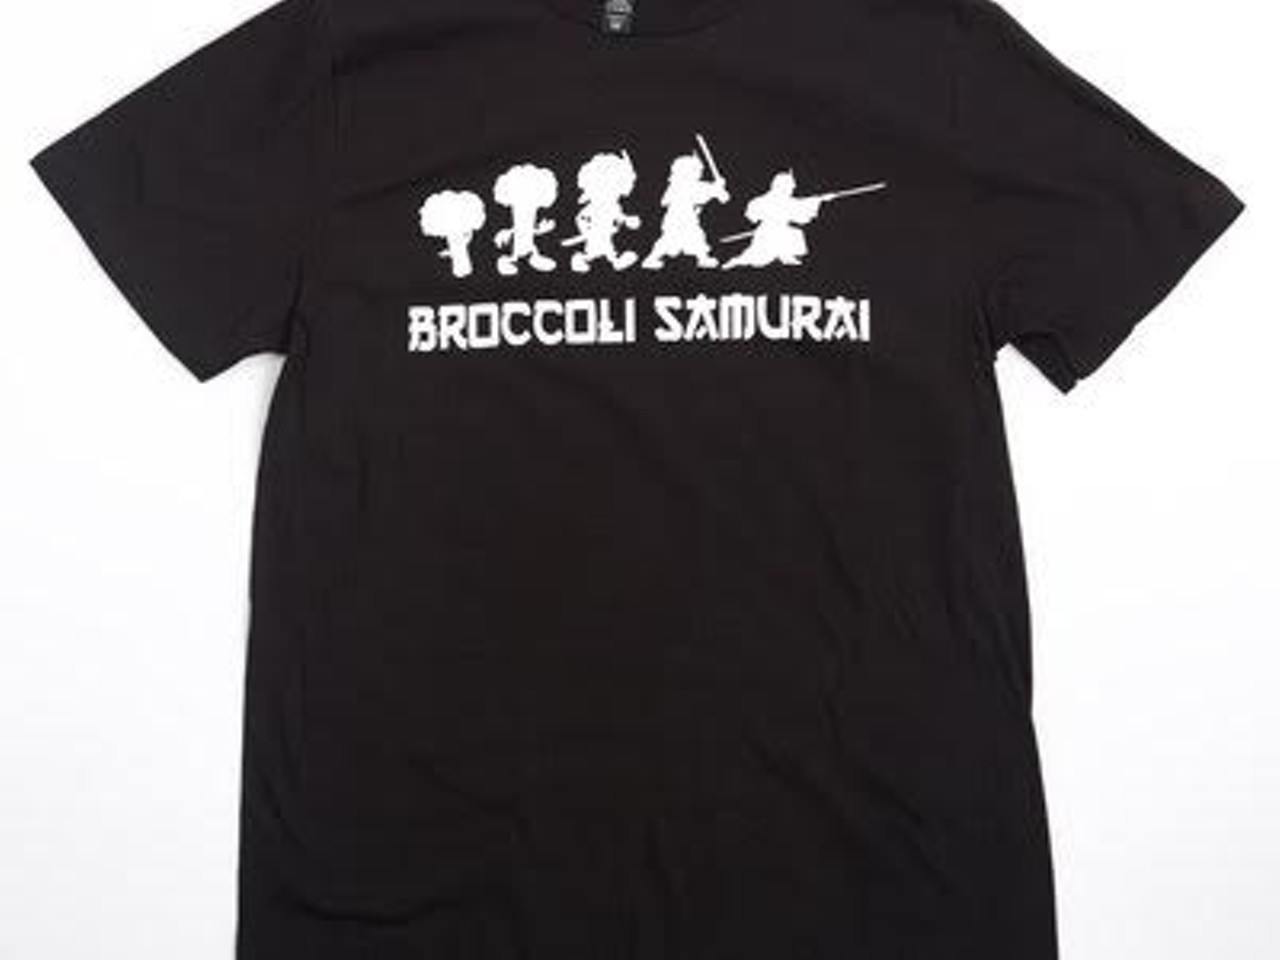 Broccoli Samurai &#147;Evolution&#148; T-shirt - $20
Listen, there&#146;s a hell of a lot of cool band merch around Cleveland. But Broccoli Samurai&#146;s &#147;Evolution&#148; T-shirt &#151; the one with the broccoli stalk literally morphing into a samurai &#151; is our favorite example. You can pick up one for your jam-band-loving cousin on their website or, better yet, you can check out the Very Broccoli Christmas Show at Beachland Ballroom on Dec. 26 and grab some threads in-person after dosing your ears on sweet, sweet music. There are a lot of ways to rep Cleveland on your chest &#151; shirts that say &#147;I Heart the Land&#148; or something &#151; but this one will invite curious conversations and subsequent high-fiving Cleveland pride. brocsam.com